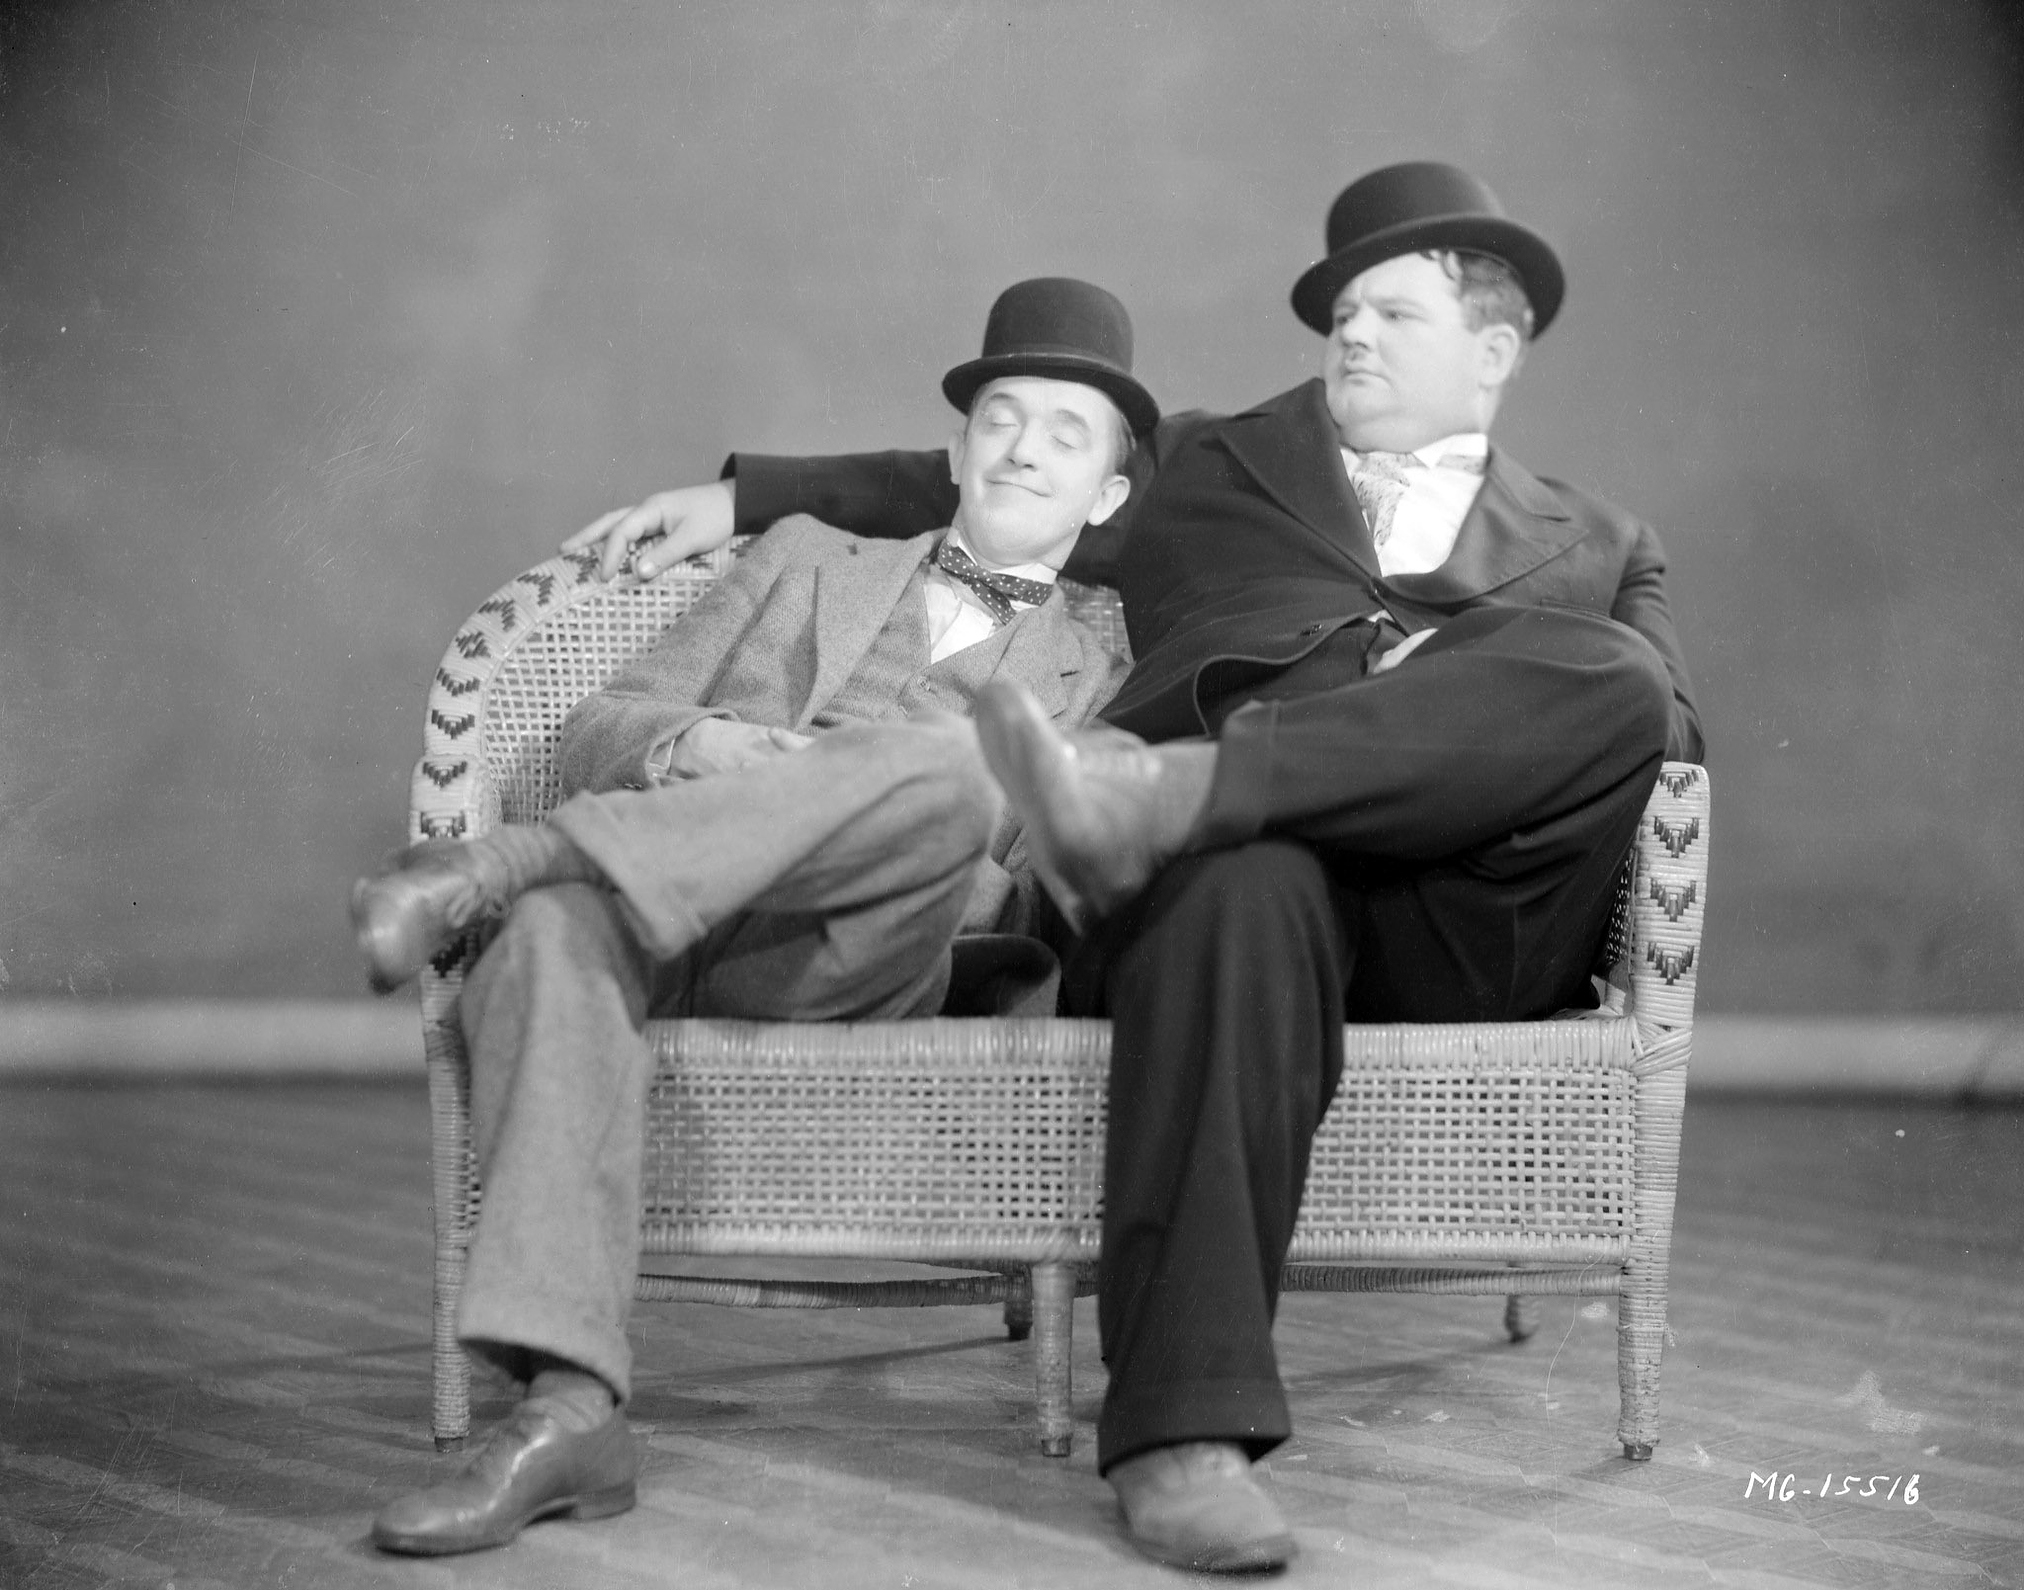 Stan Laurel enjoys blissful sleep, to the annoyance of his comedy partner Oliver Hardy, 1930.